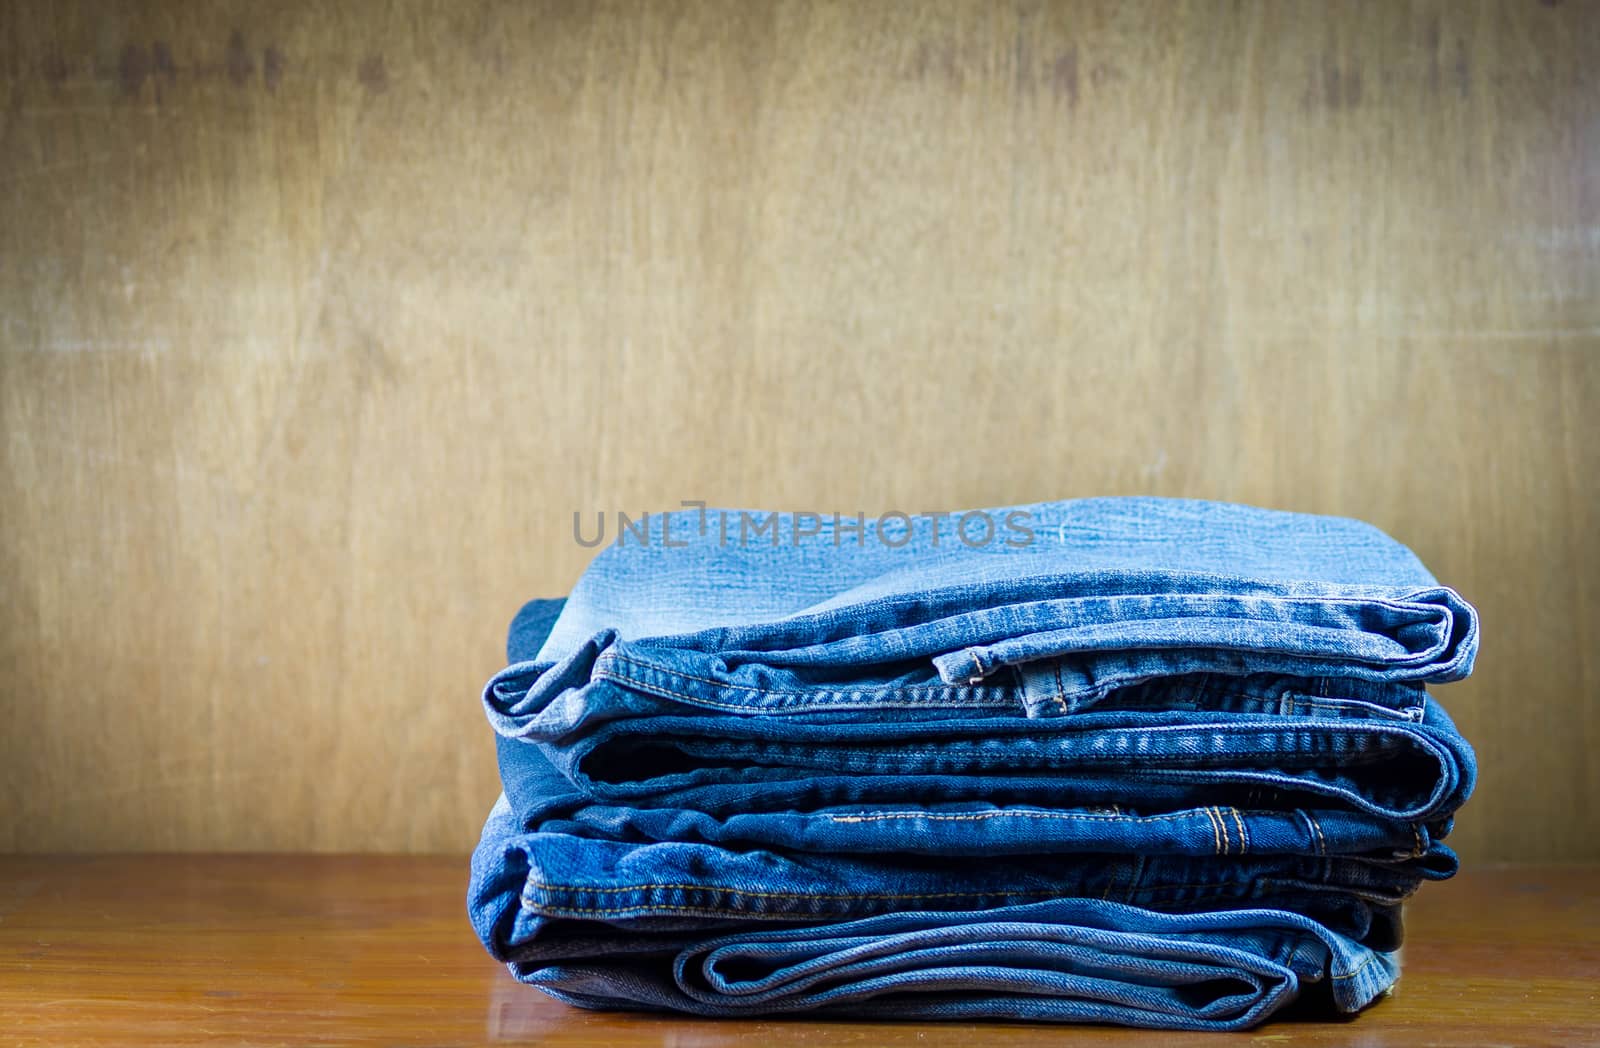 Lot of different old blue jeans on wood background.